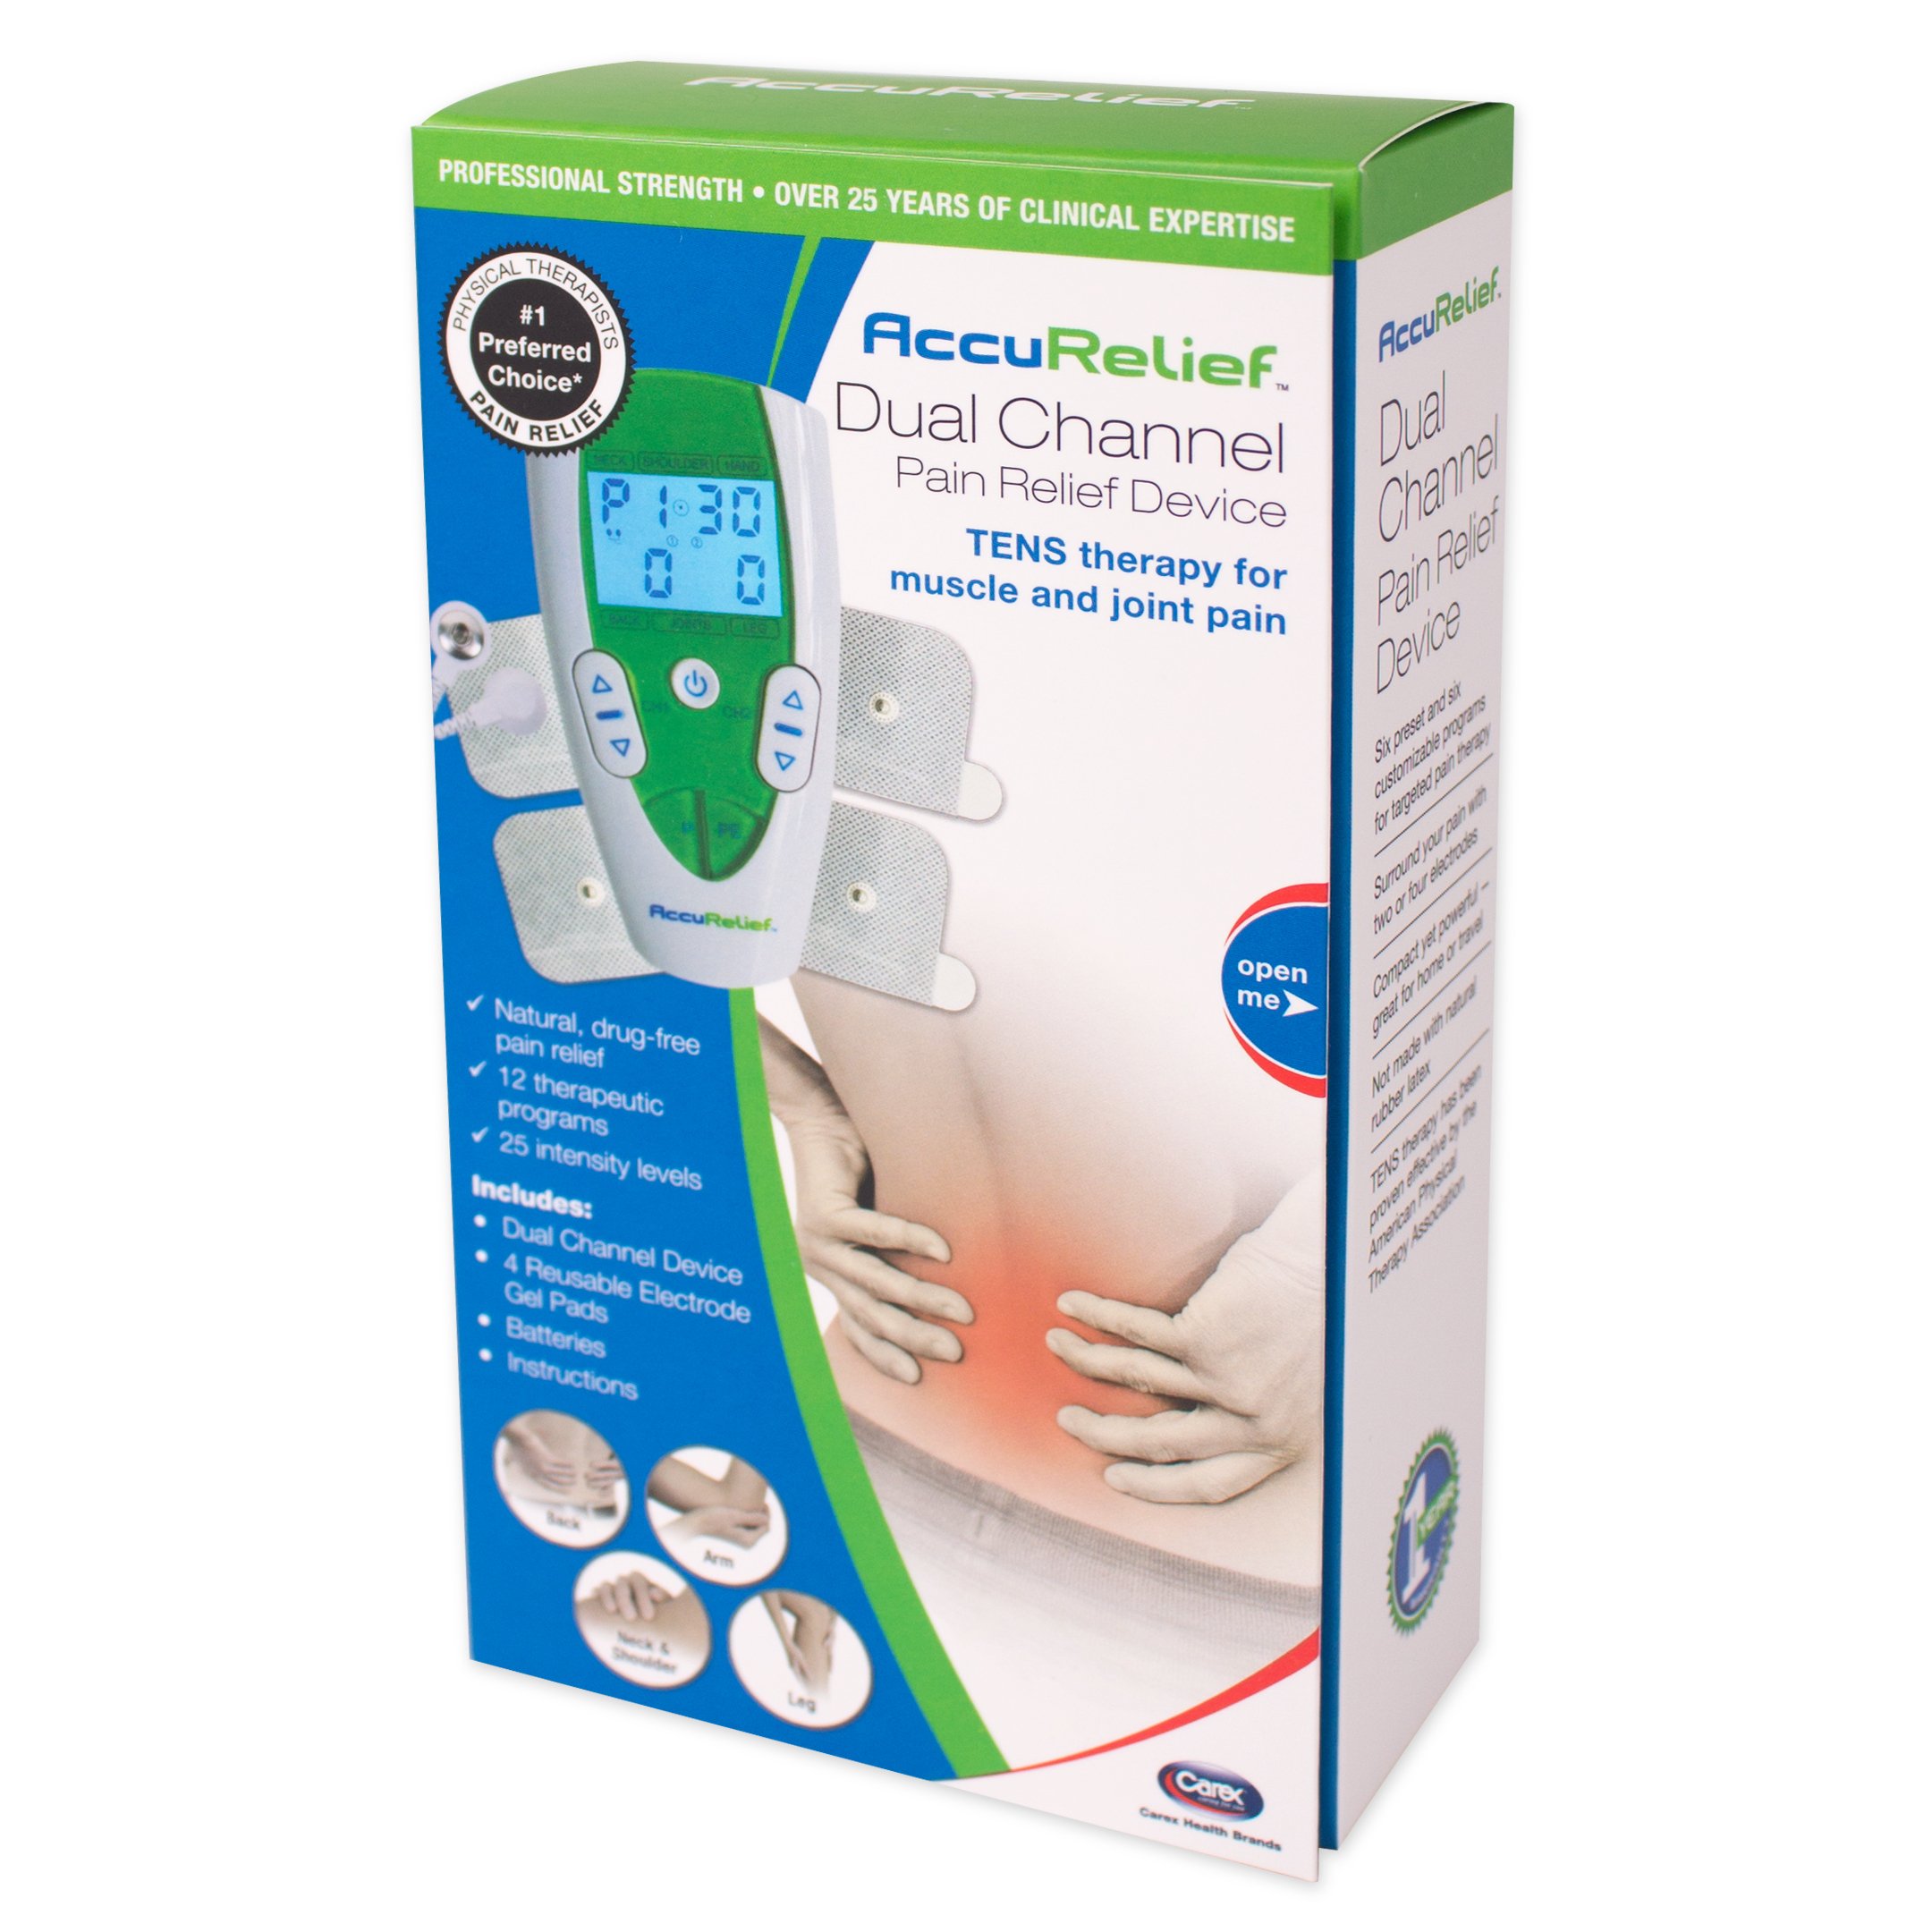 AccuRelief Wireless TENS Electrotherapy Pain Relief System Supply Kit  (Packaging May Vary) Works with AccuRelief Wireless Remote Control TENS  Device (ACRL-9000) 2 Pair (Pack of 1)